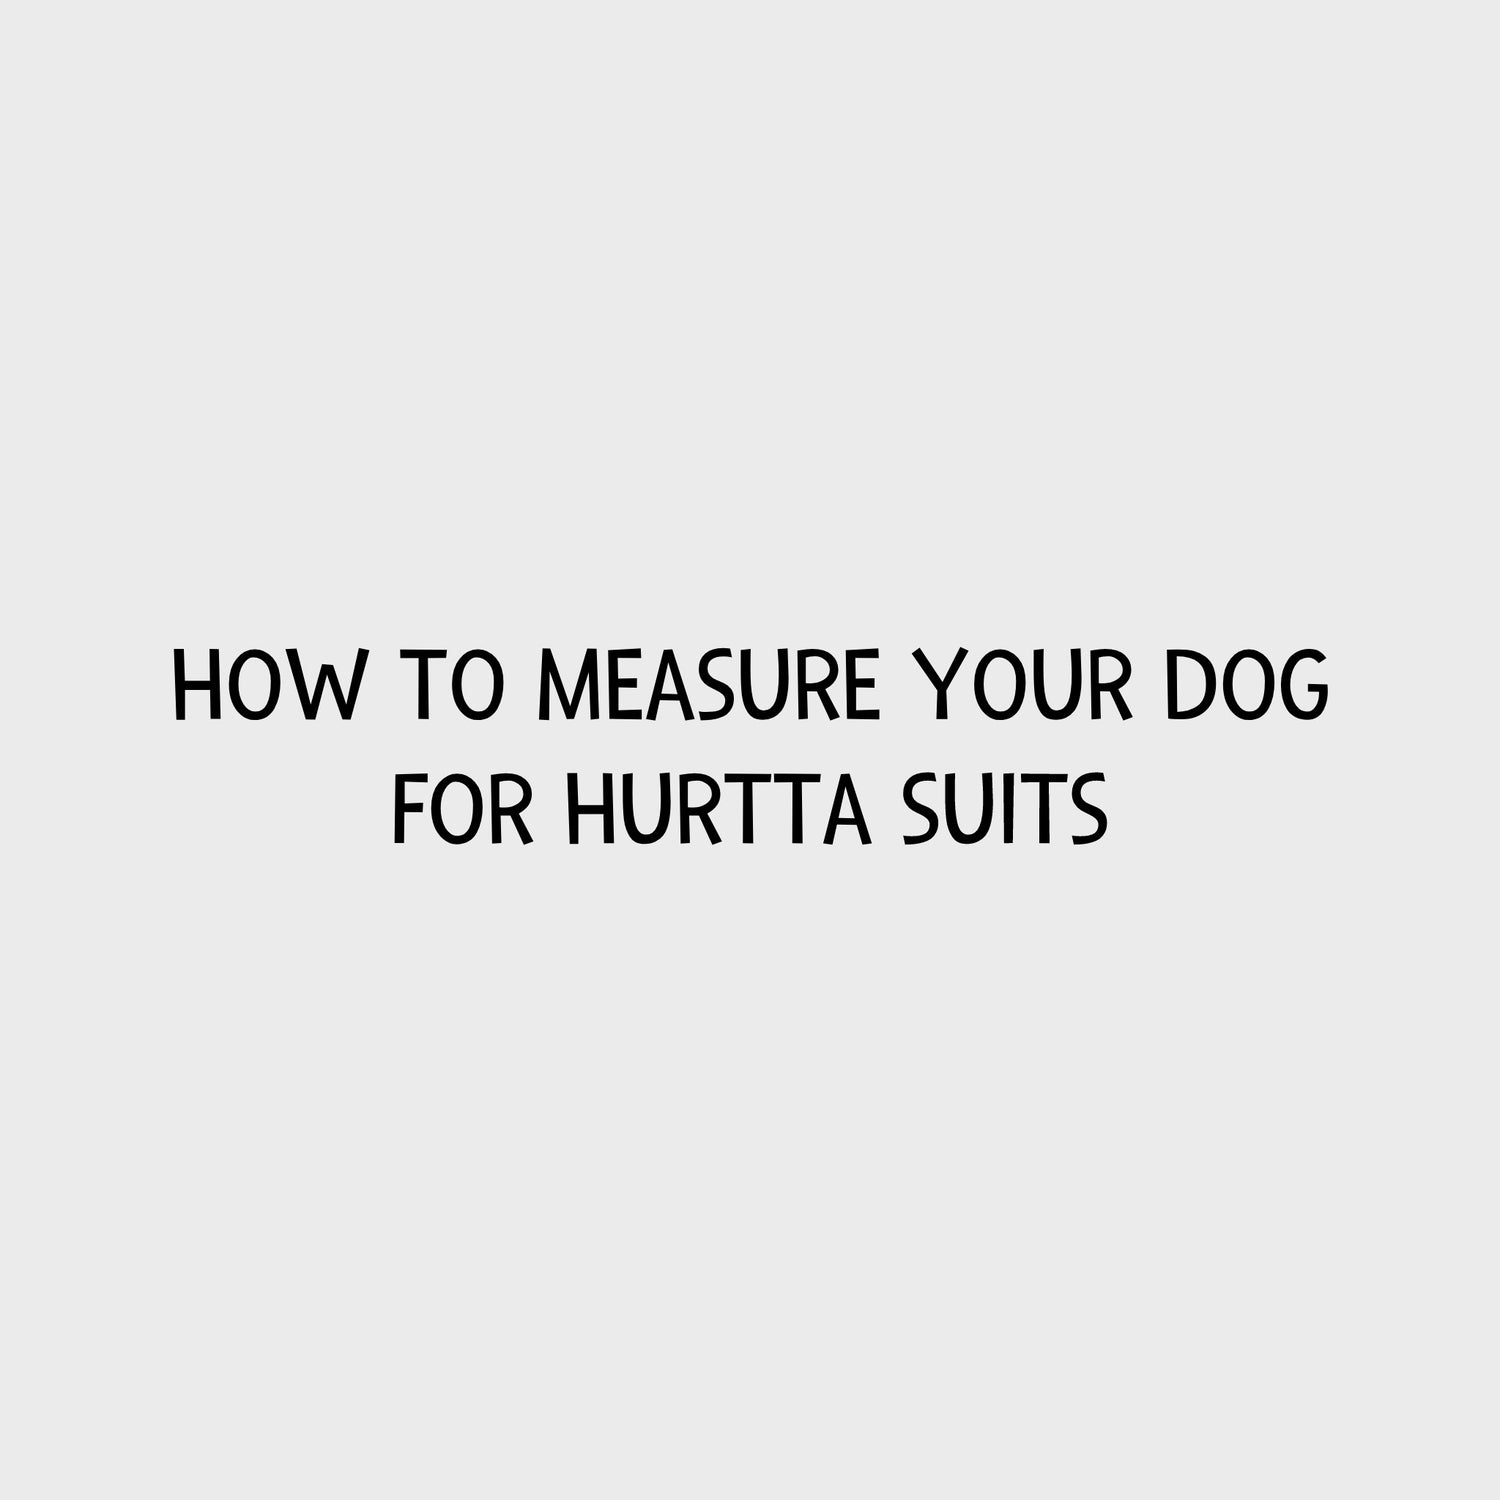 Video - How to measure your dog for Hurtta suits